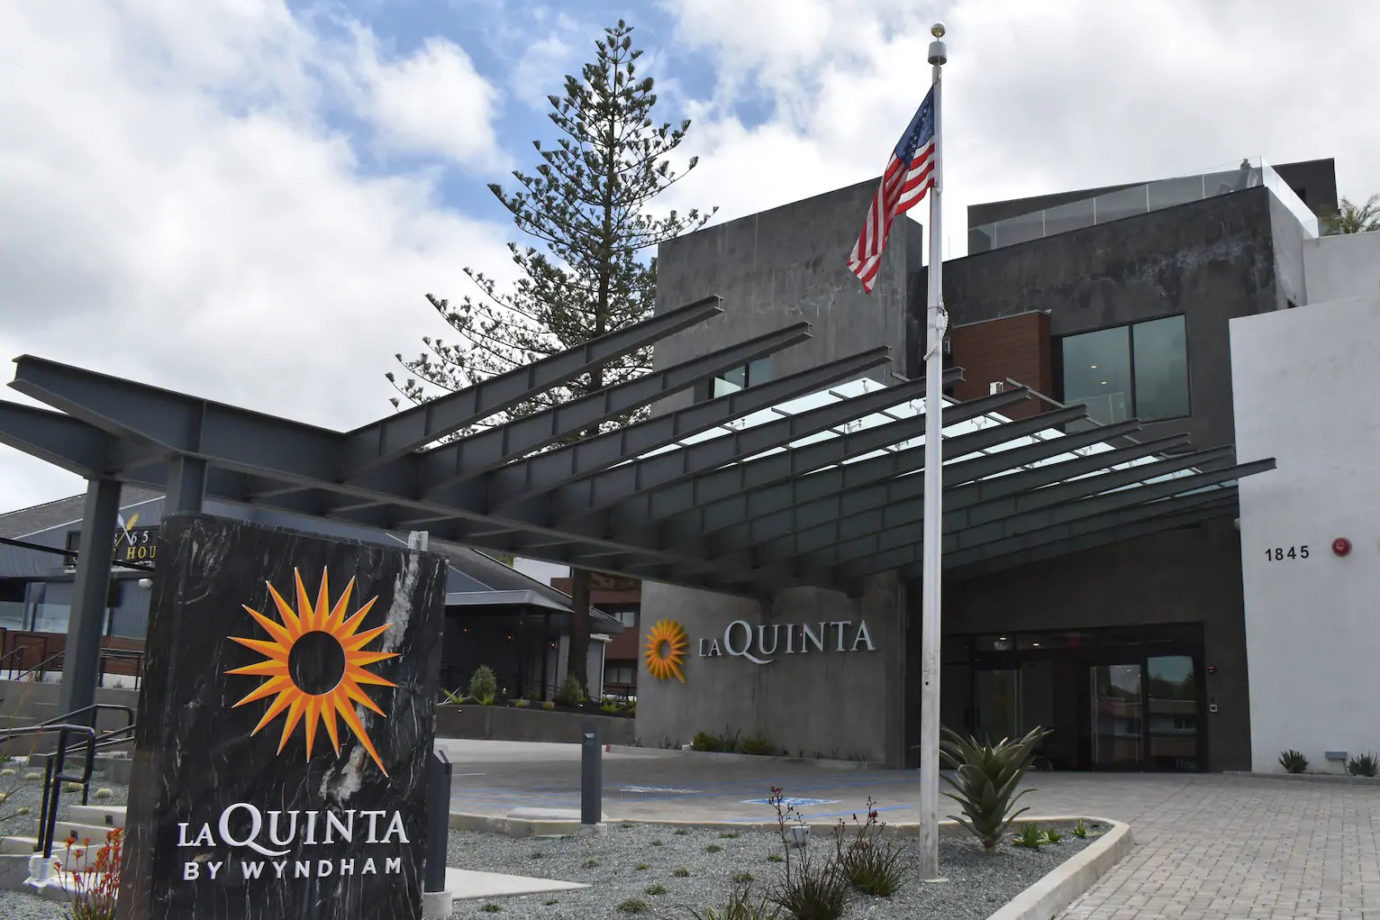 La Quinta by Wyndham Shows Strong Development Momentum One Year after Acquisition